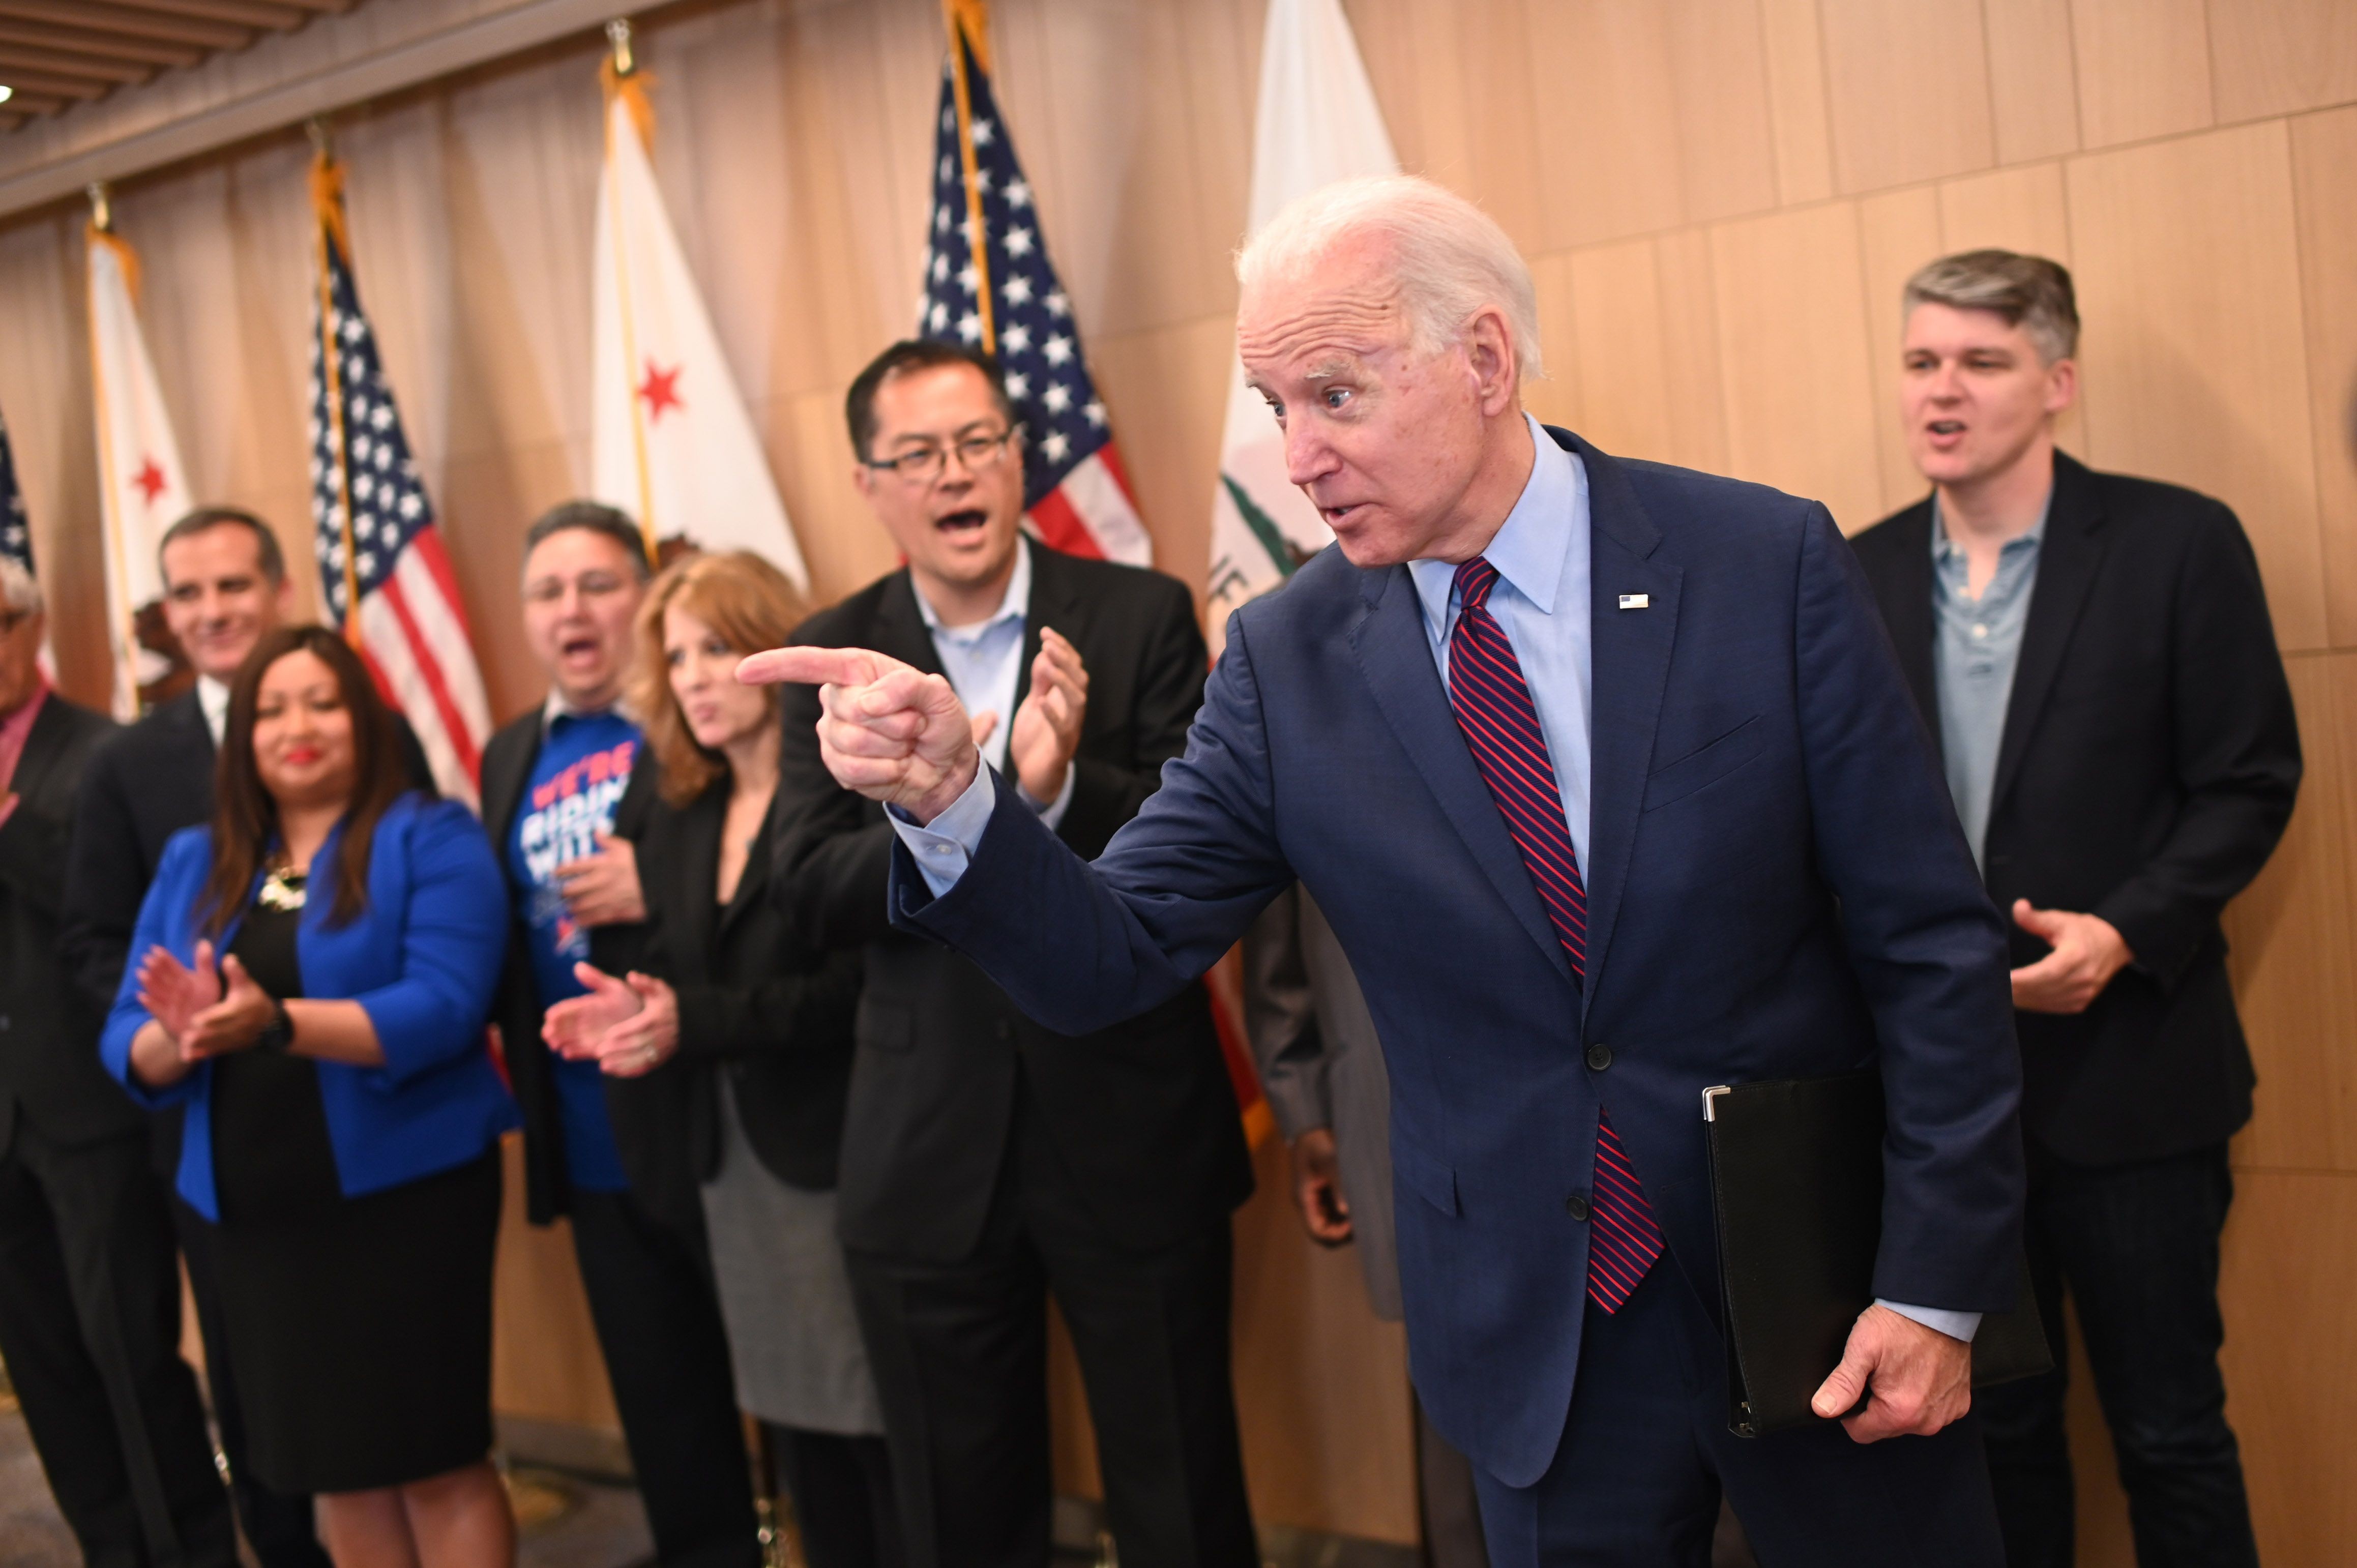 Democratic presidential hopeful Joe Biden answers a question after delivering remarks in Los Angeles, California, on Wednesday. Following his victory in the Super Tuesday primaries, Biden is now the clear front runner in the nomination race, with Bernie Sanders his only viable rival. Photo: AFP